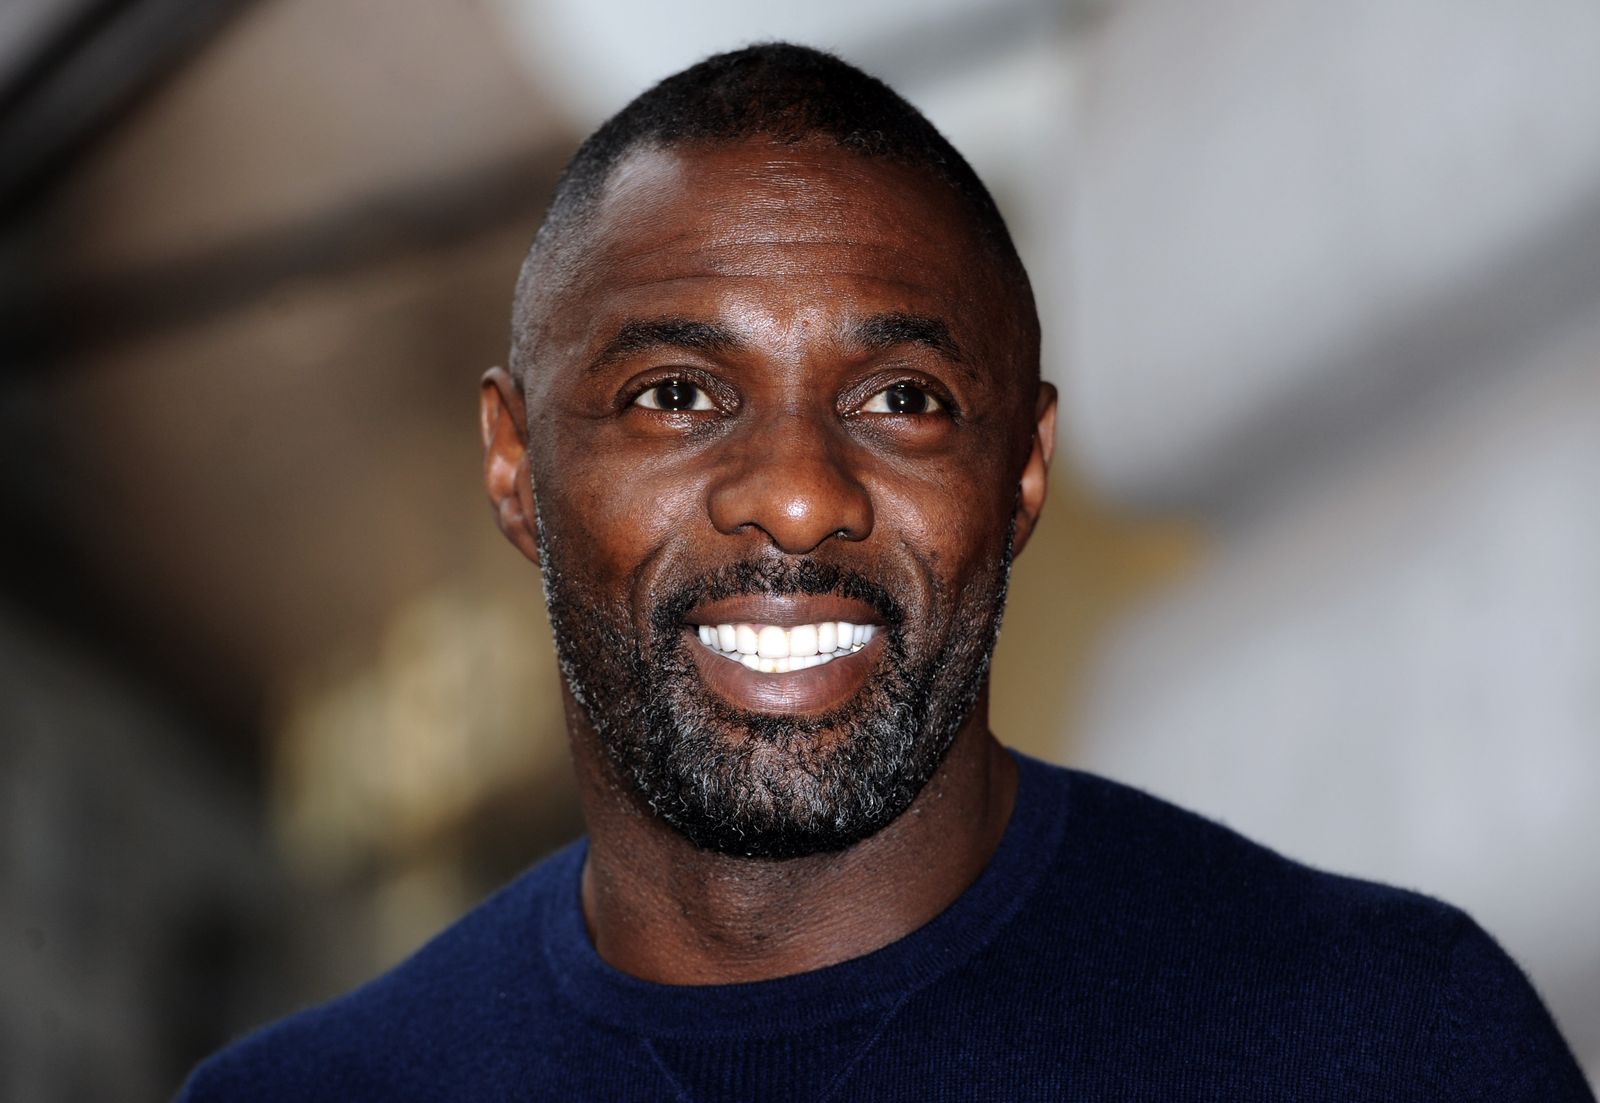  Idris Elba attends a photocall to launch the Superdry AW15 Premium Menswear collection at Superdry International Showroom on November 26, 2015 | Photo: Getty Images